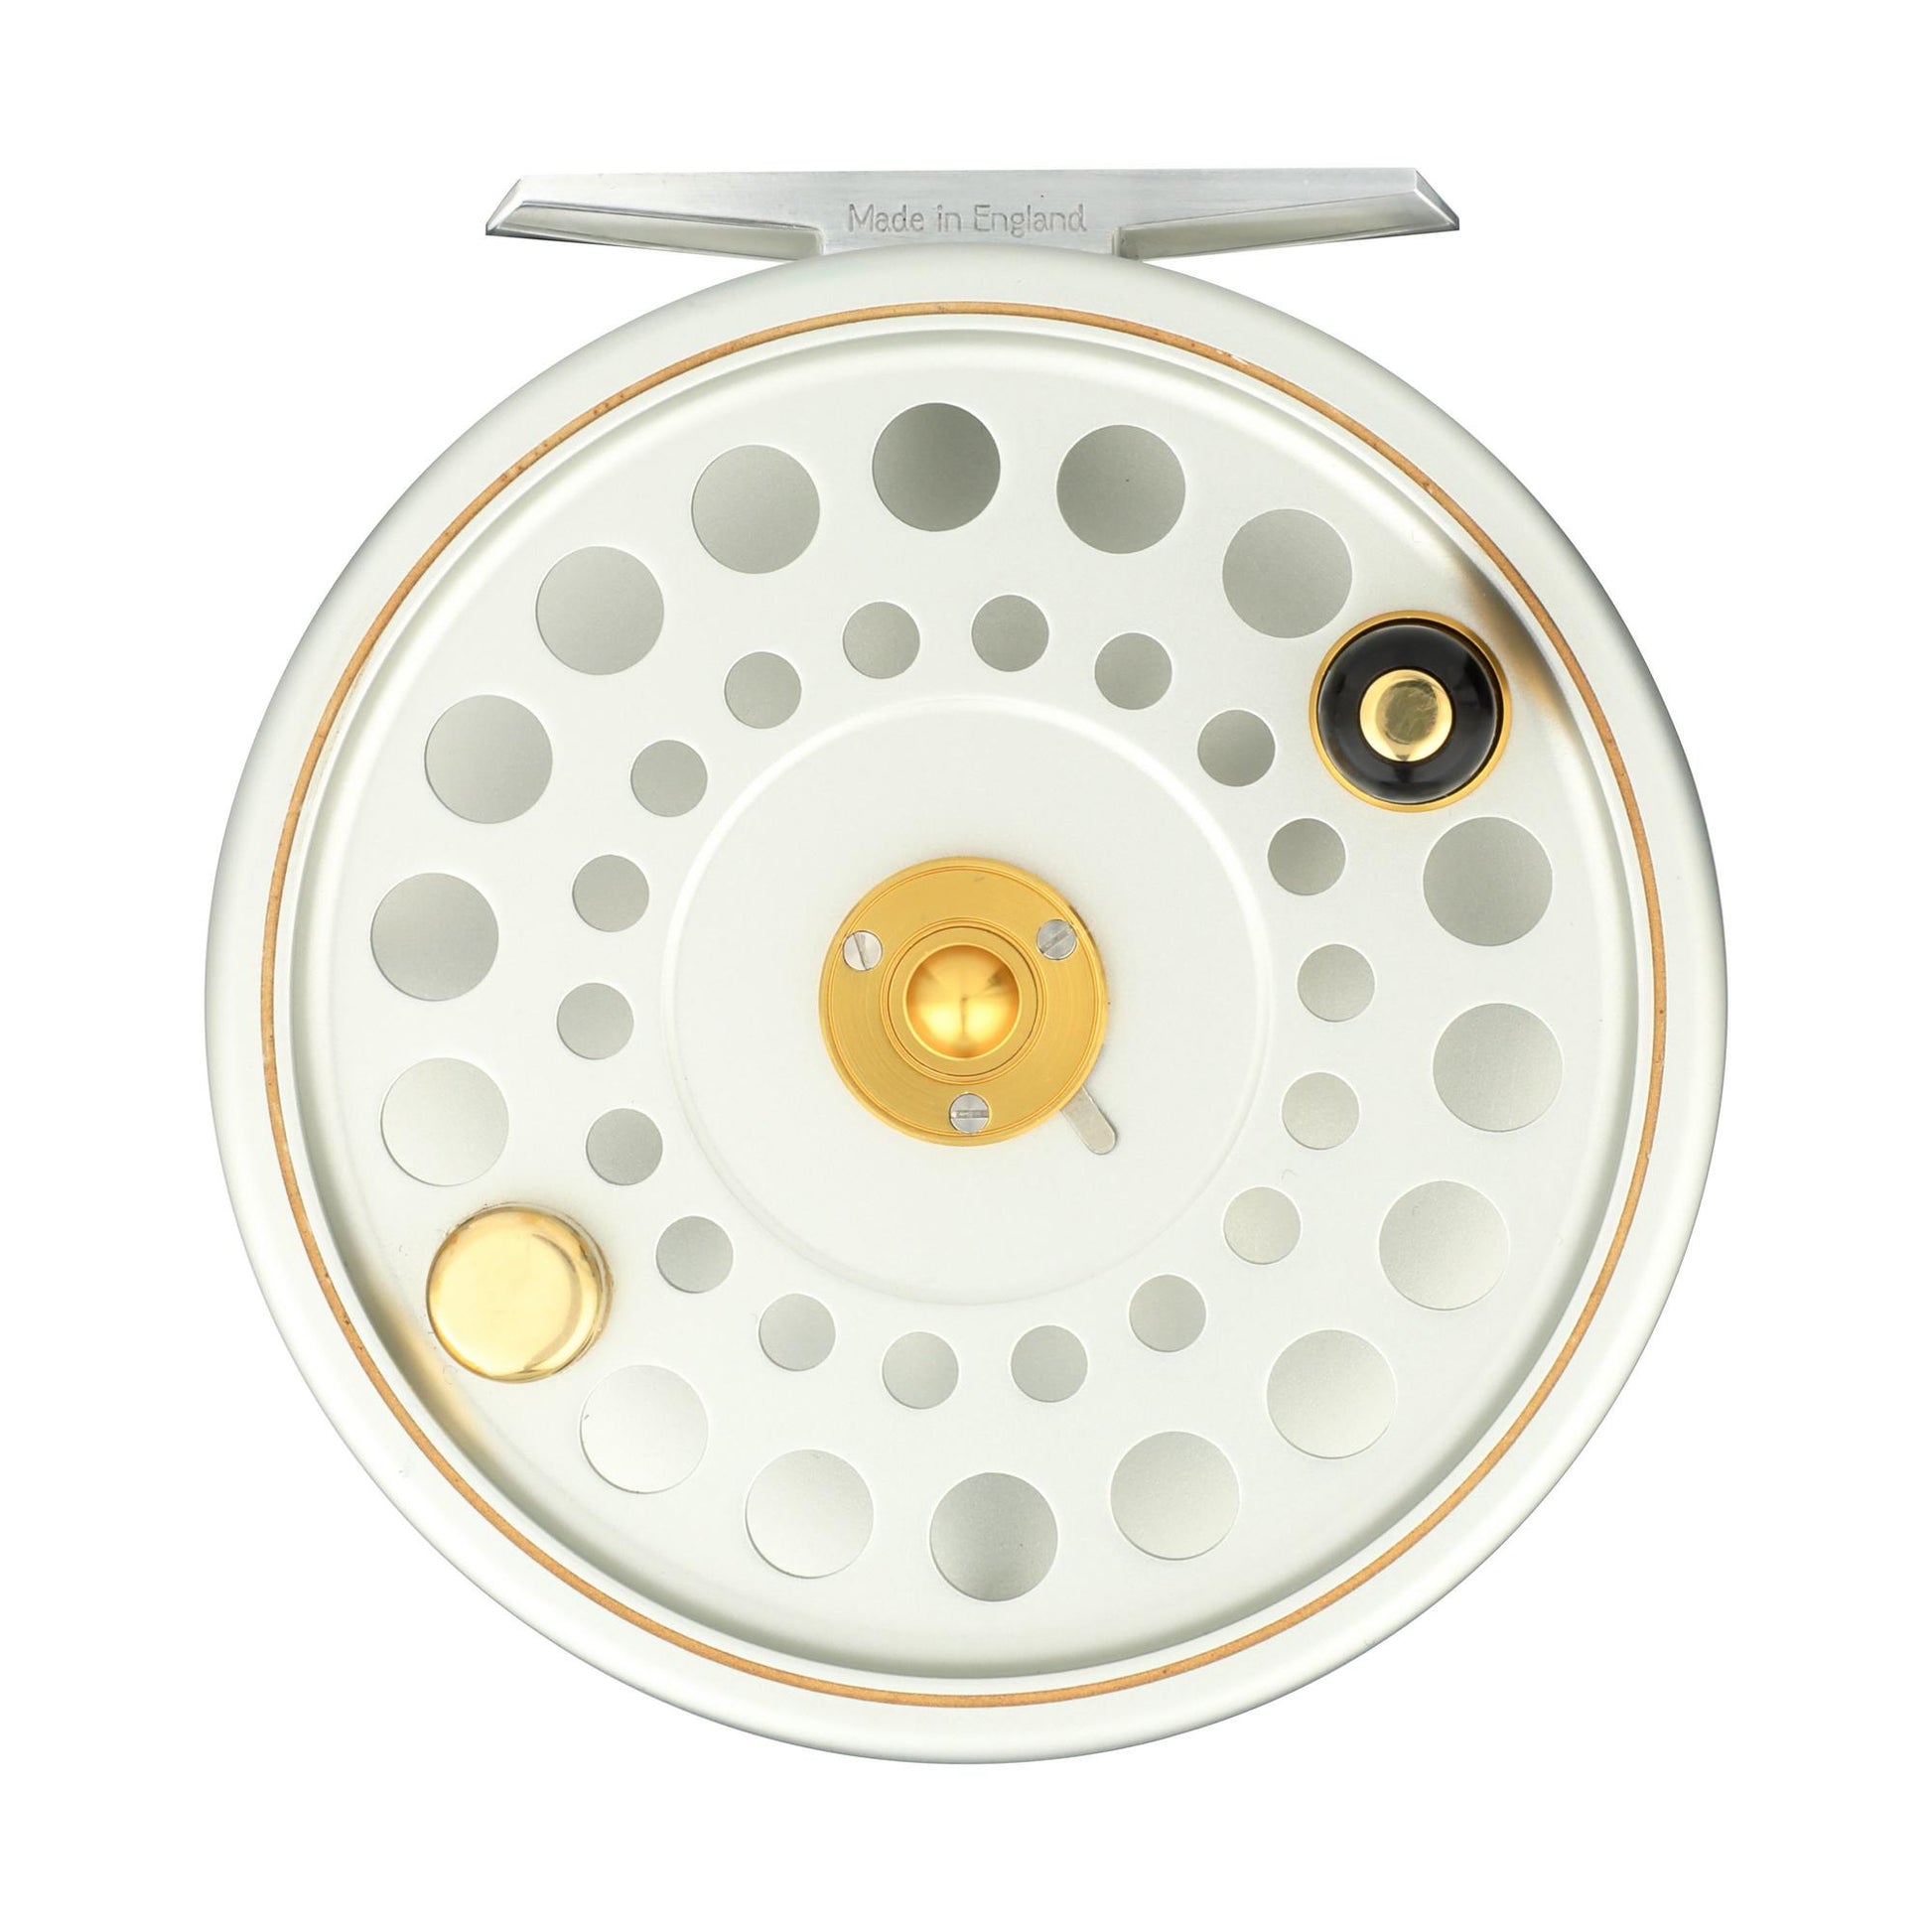 Hardy Sovereign 5/6 Spitfire Fly Reel For Sale